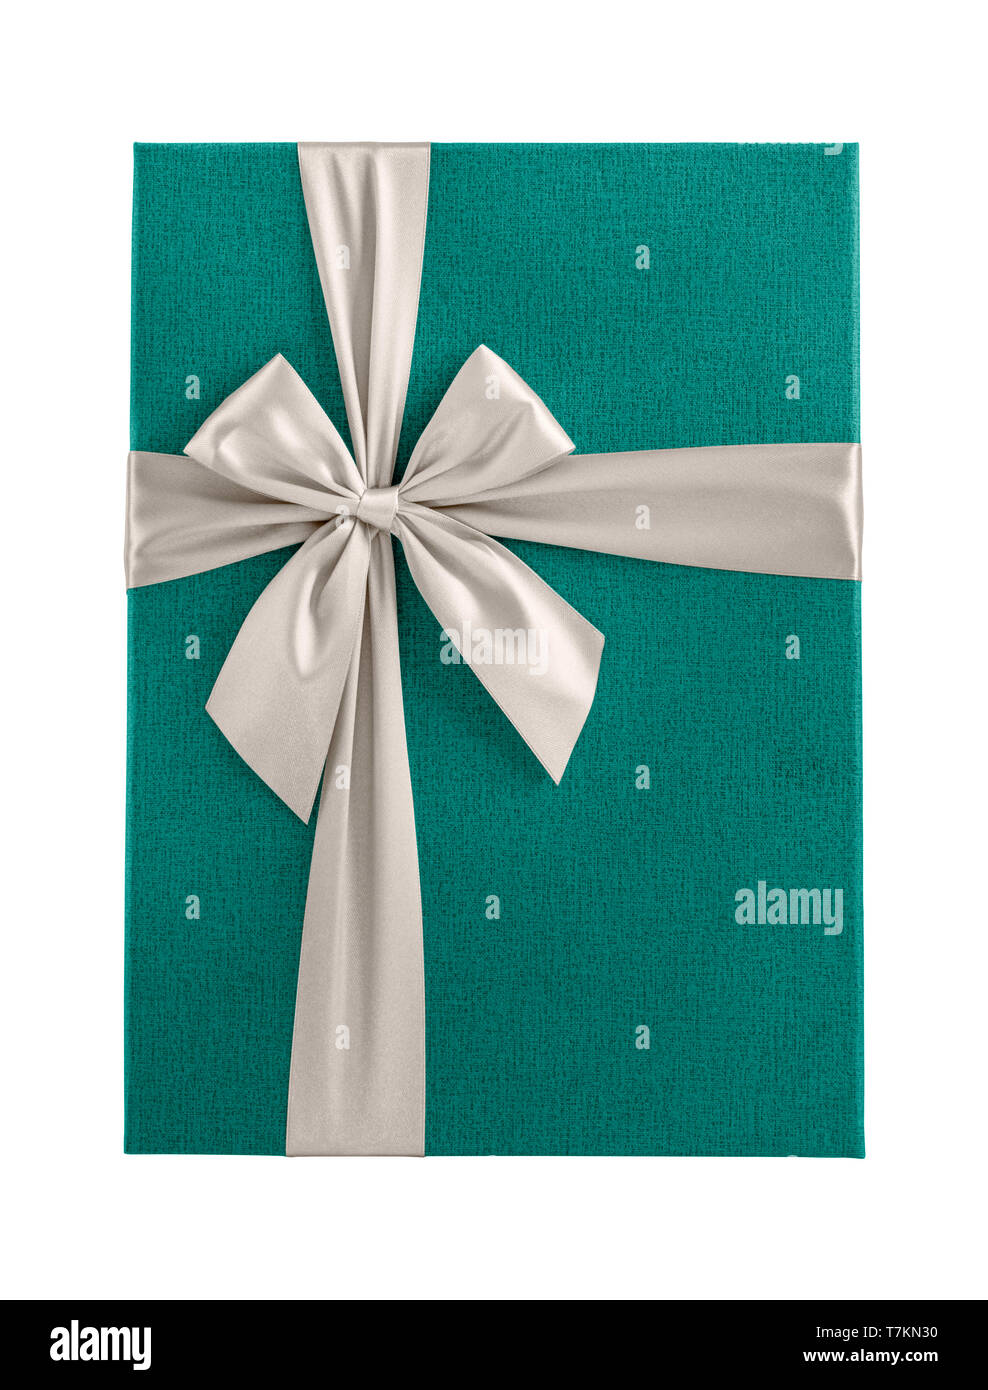 Top view green gift box with white ribbon isolated on white background, close up, design element Stock Photo